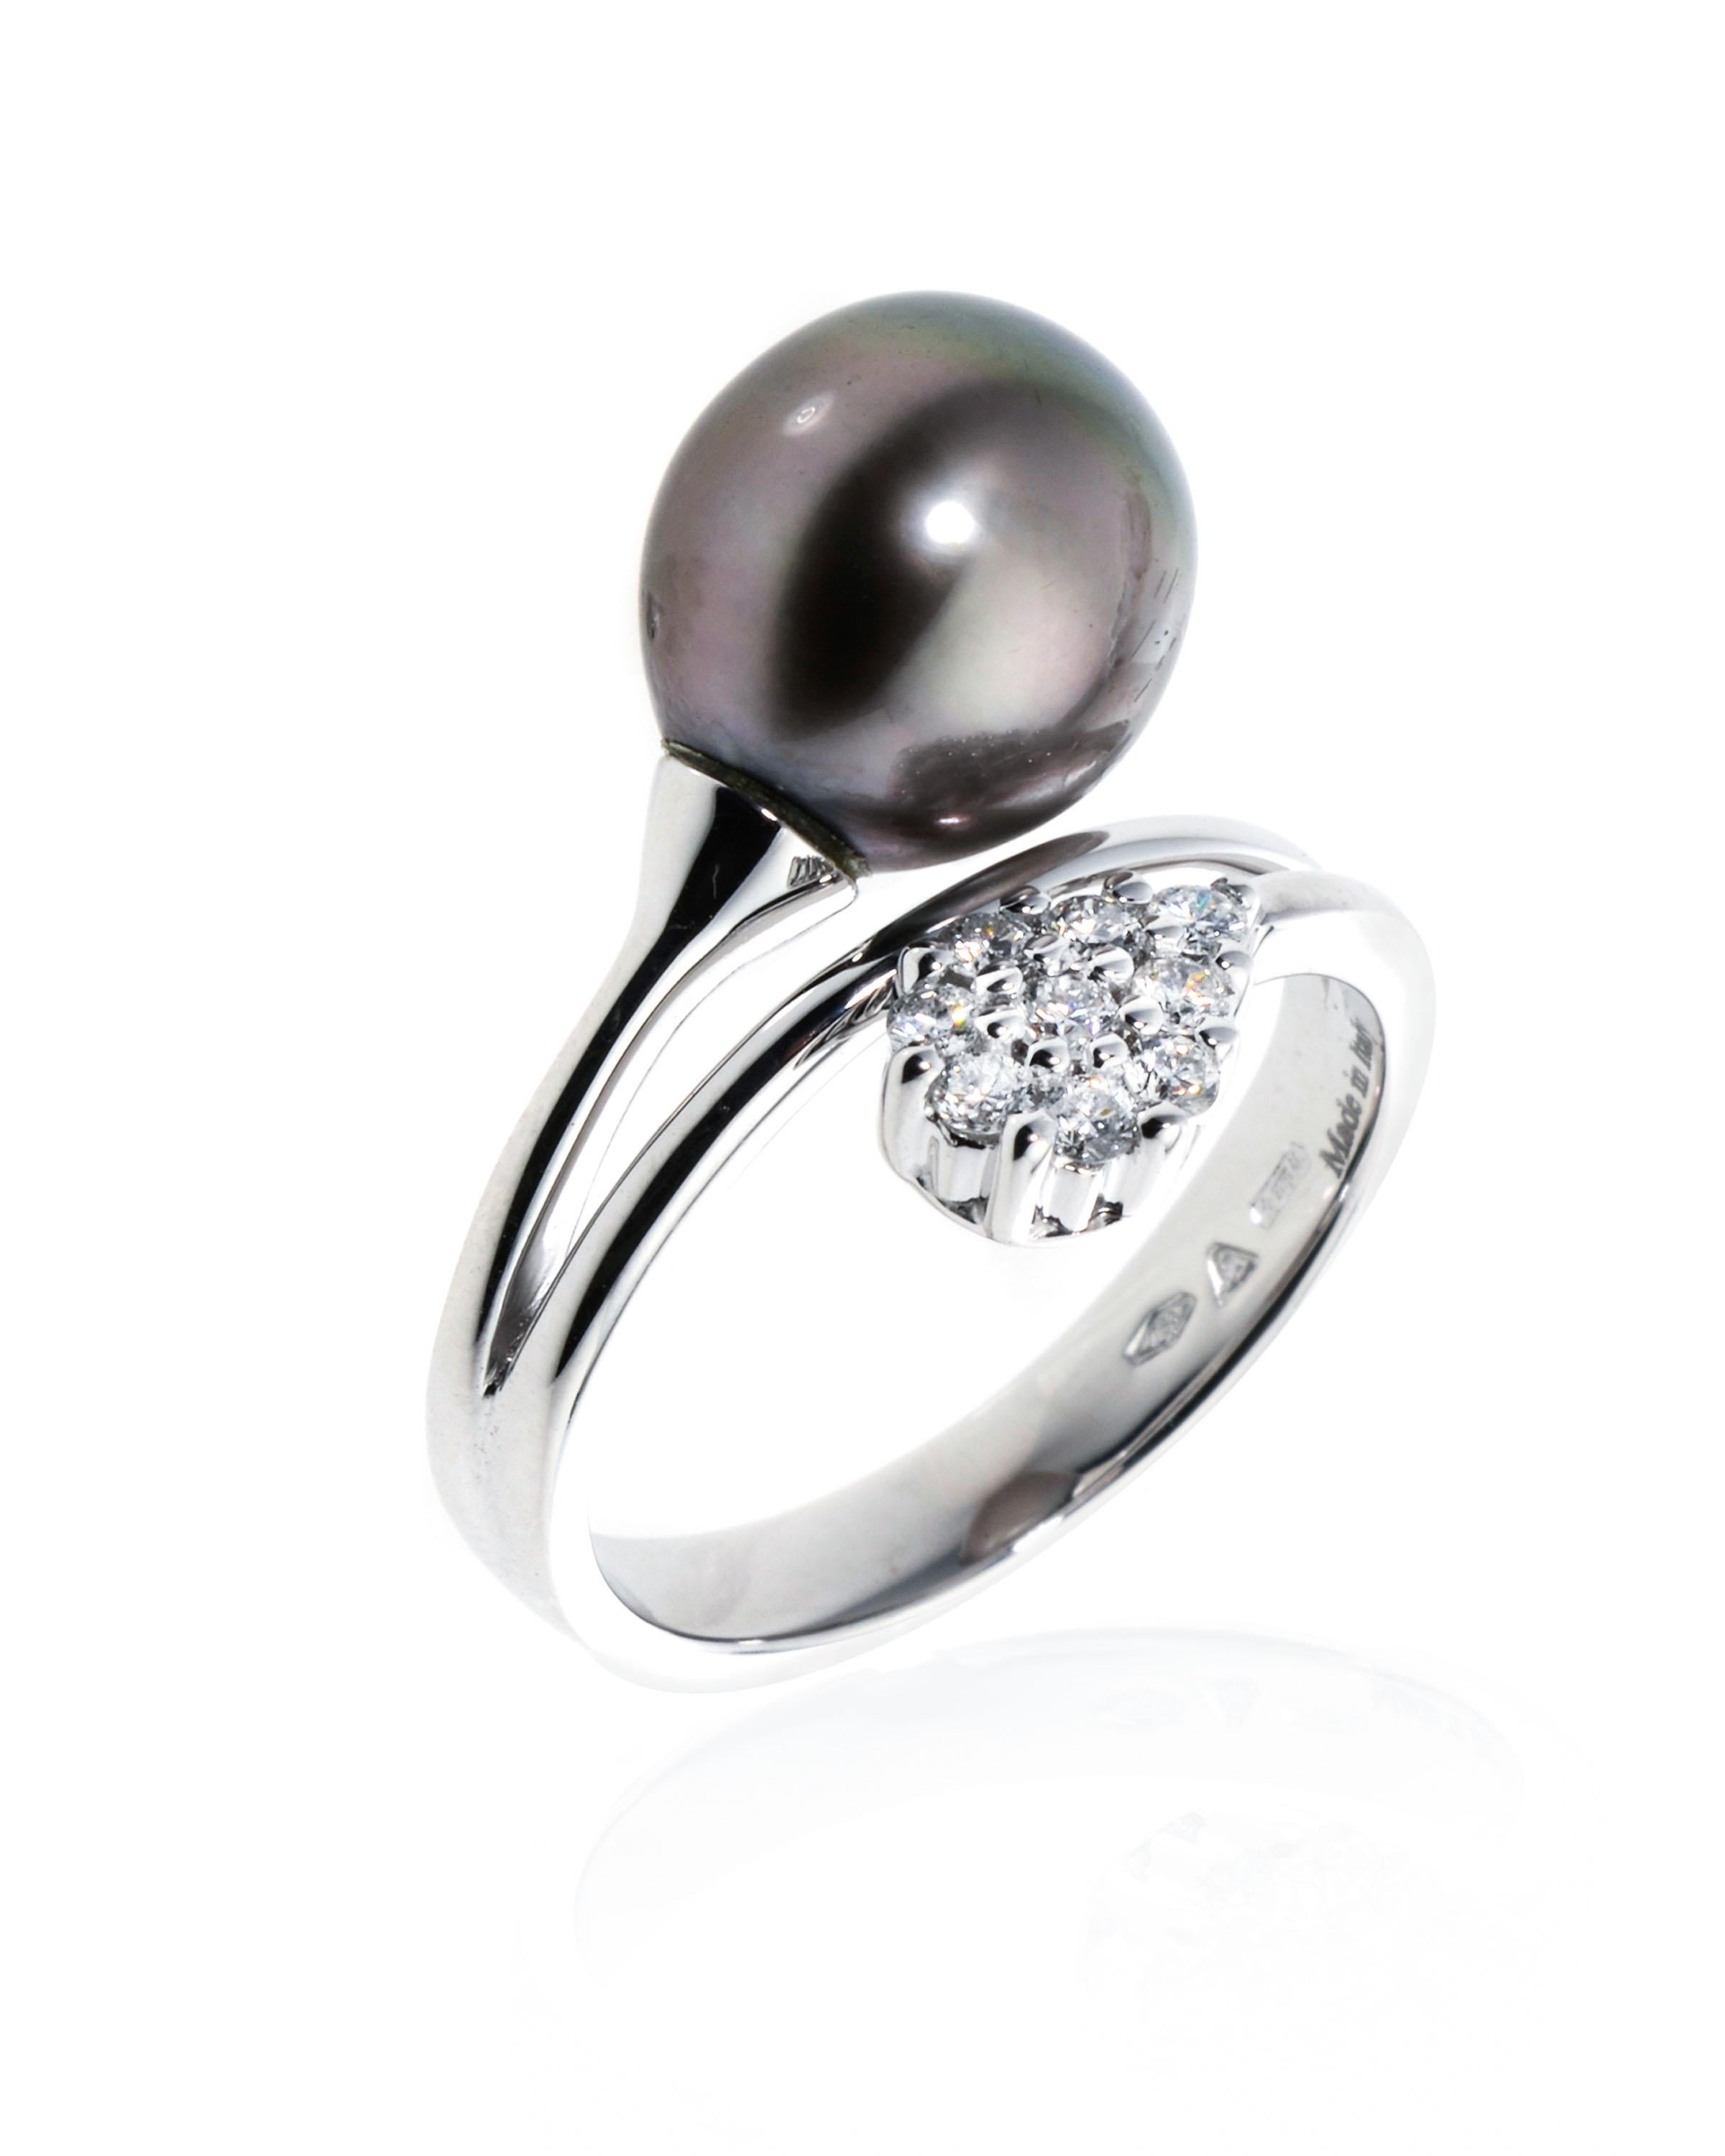 brilliant Damiani 18K white gold cocktail ring features a black pearl (1.70ct. tw.) and a cluster of diamonds 0.27ct. tw. The ring size is 7.5 (55.7). The band width is 3.3mm. The weight is 6.2g. designer jewelry is shipped with a Damiani box.
